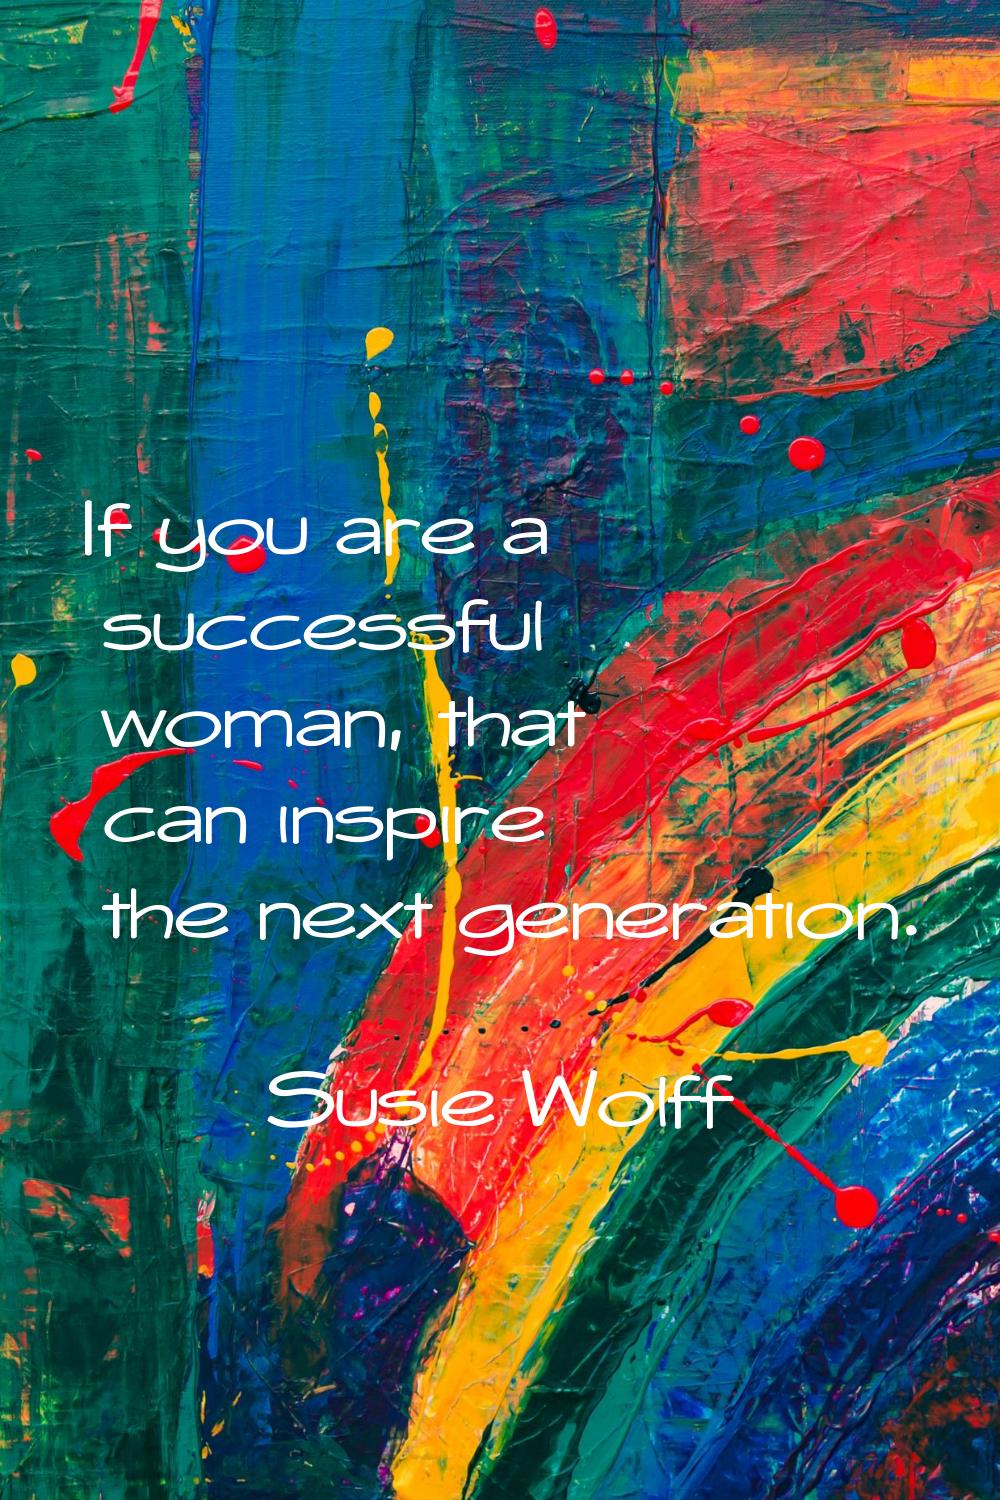 If you are a successful woman, that can inspire the next generation.